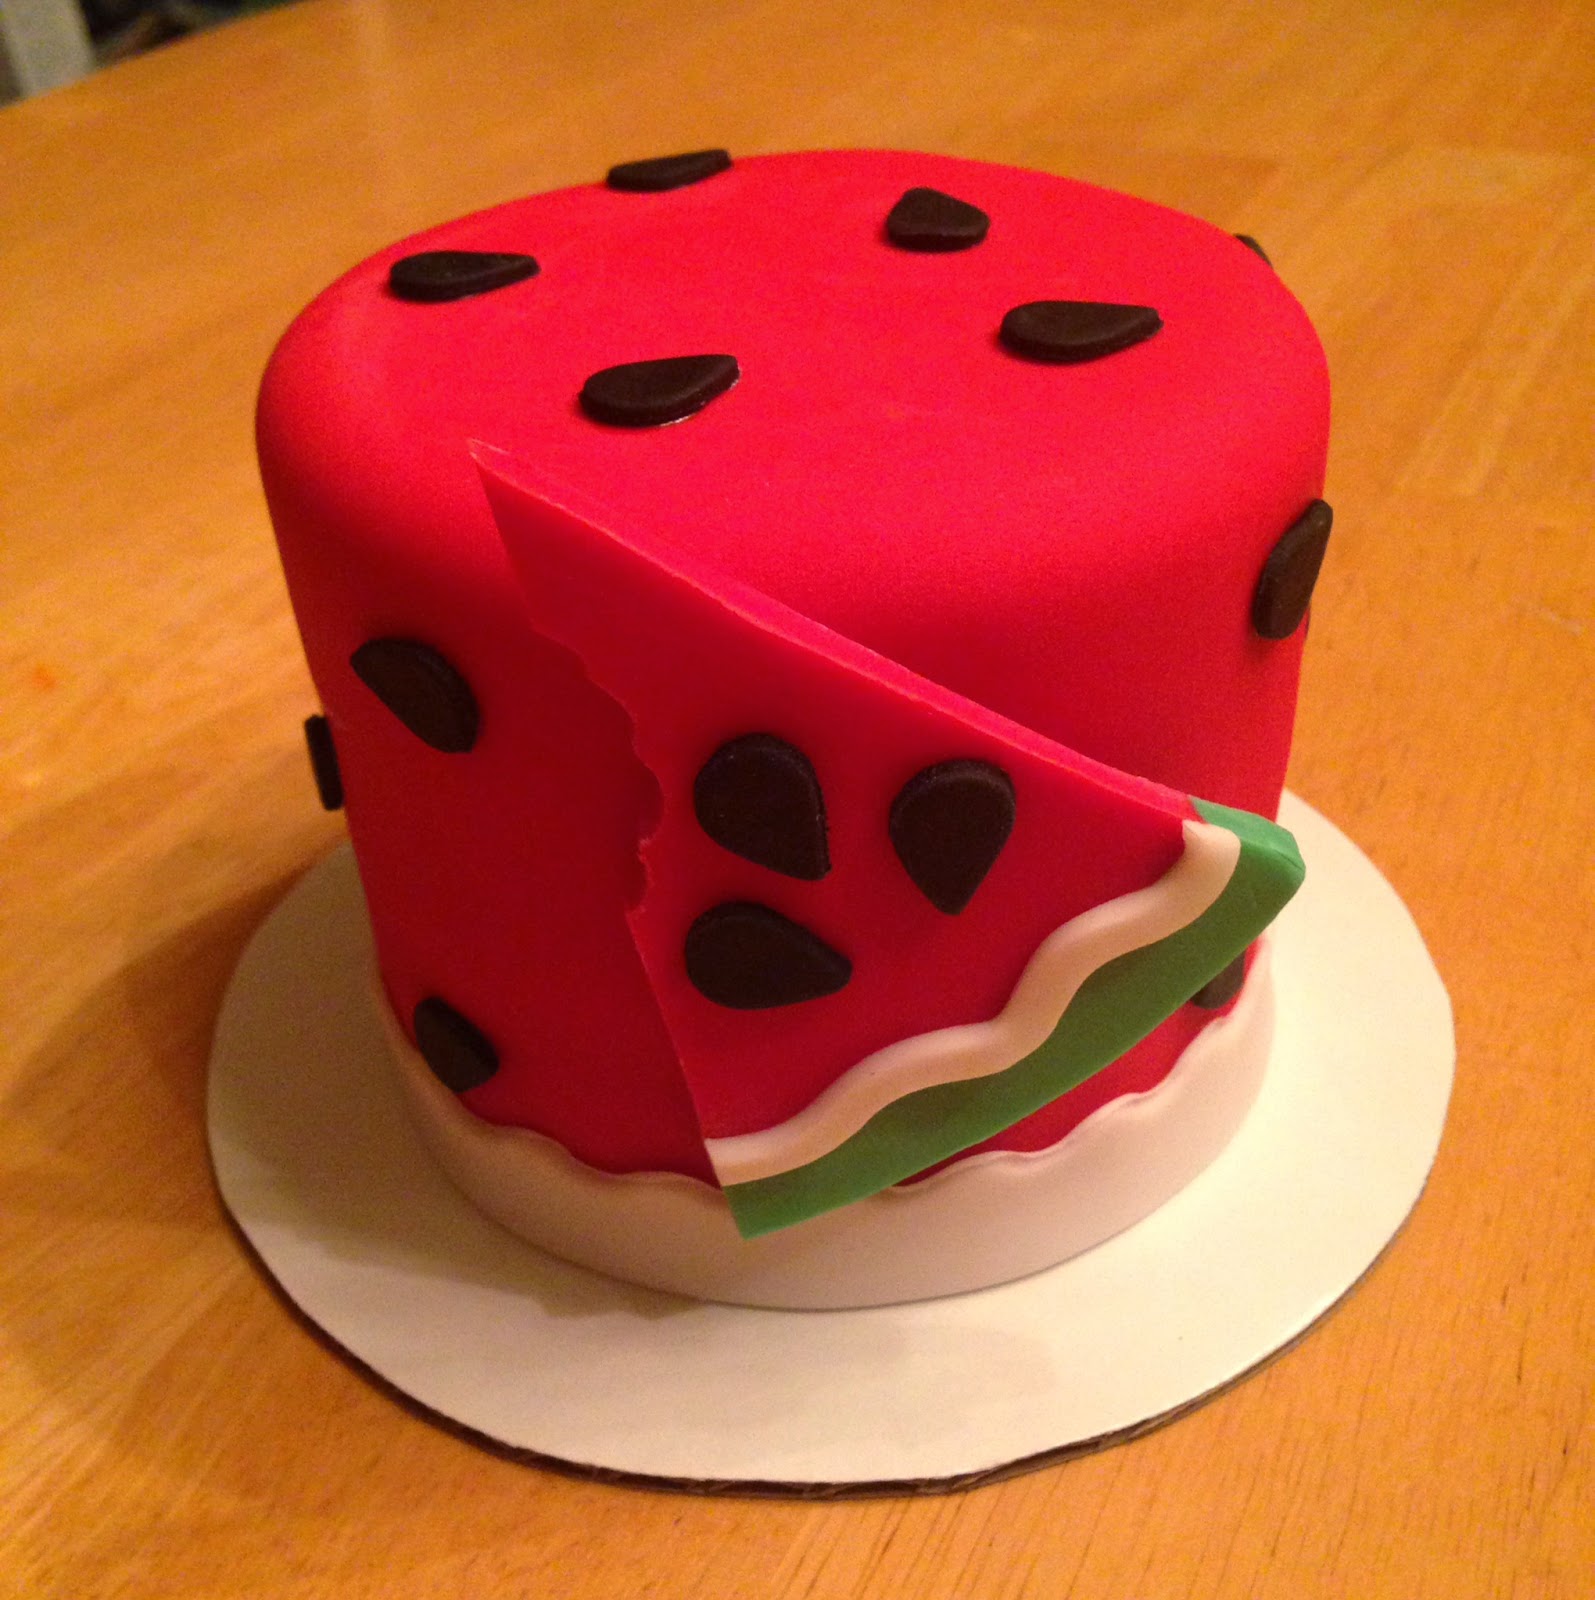 Cakes by Becky: Watermelon (Cake!)